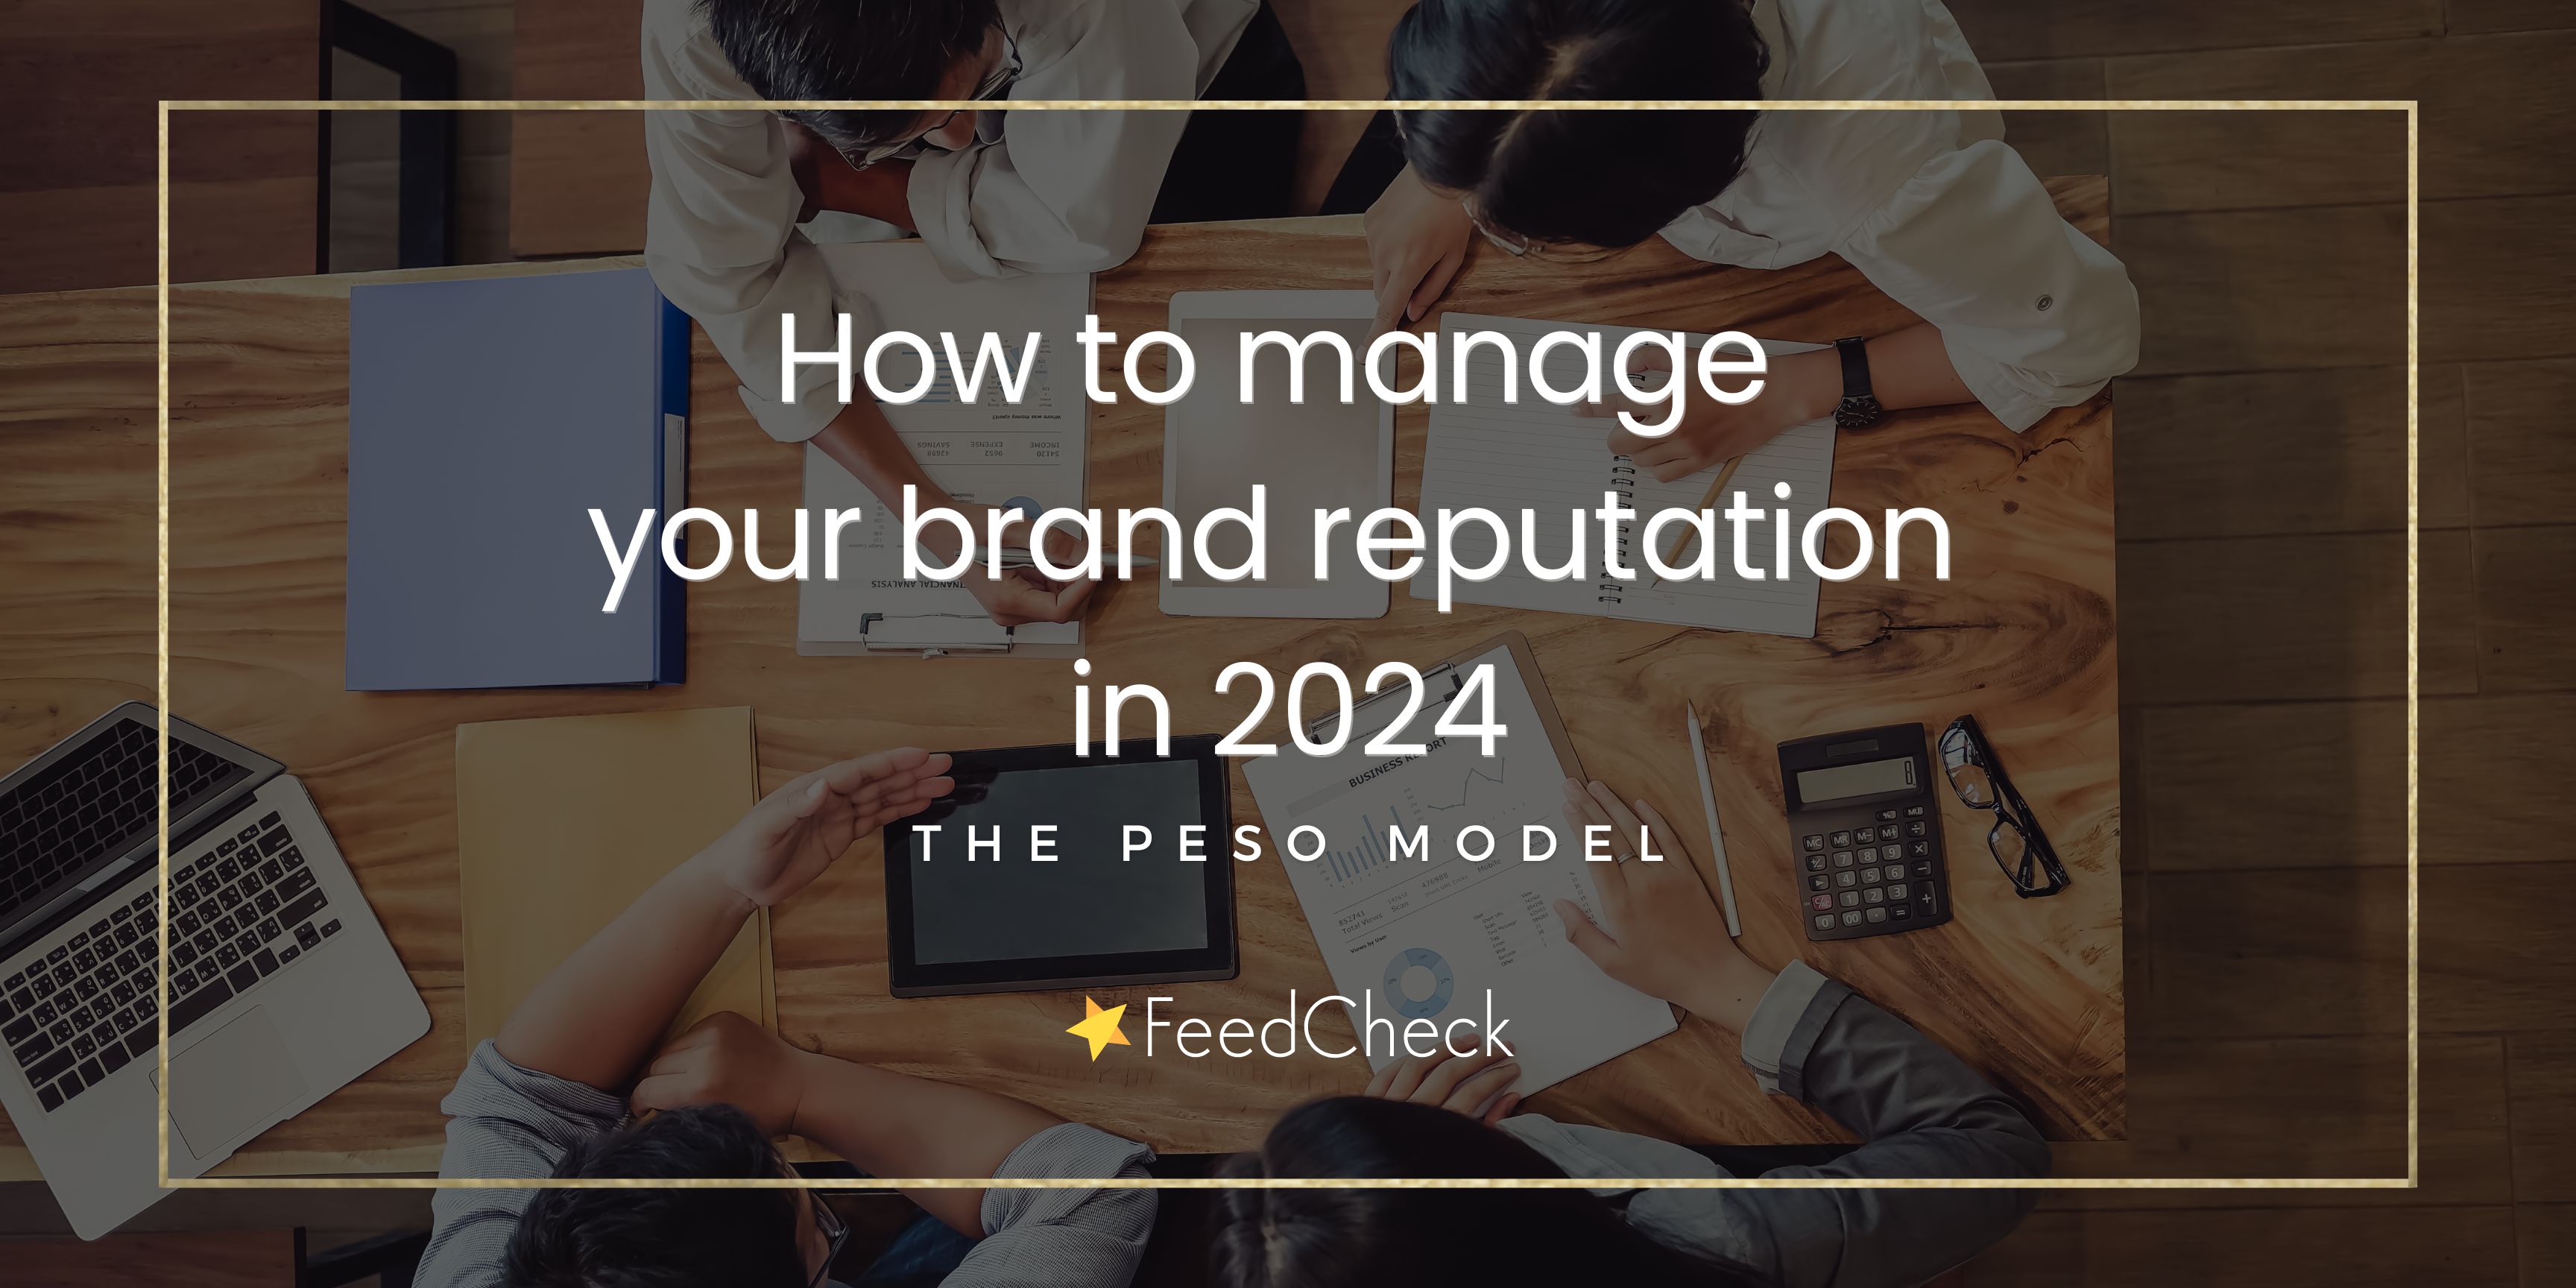 How to manage your brand reputation in 2024: the PESO model